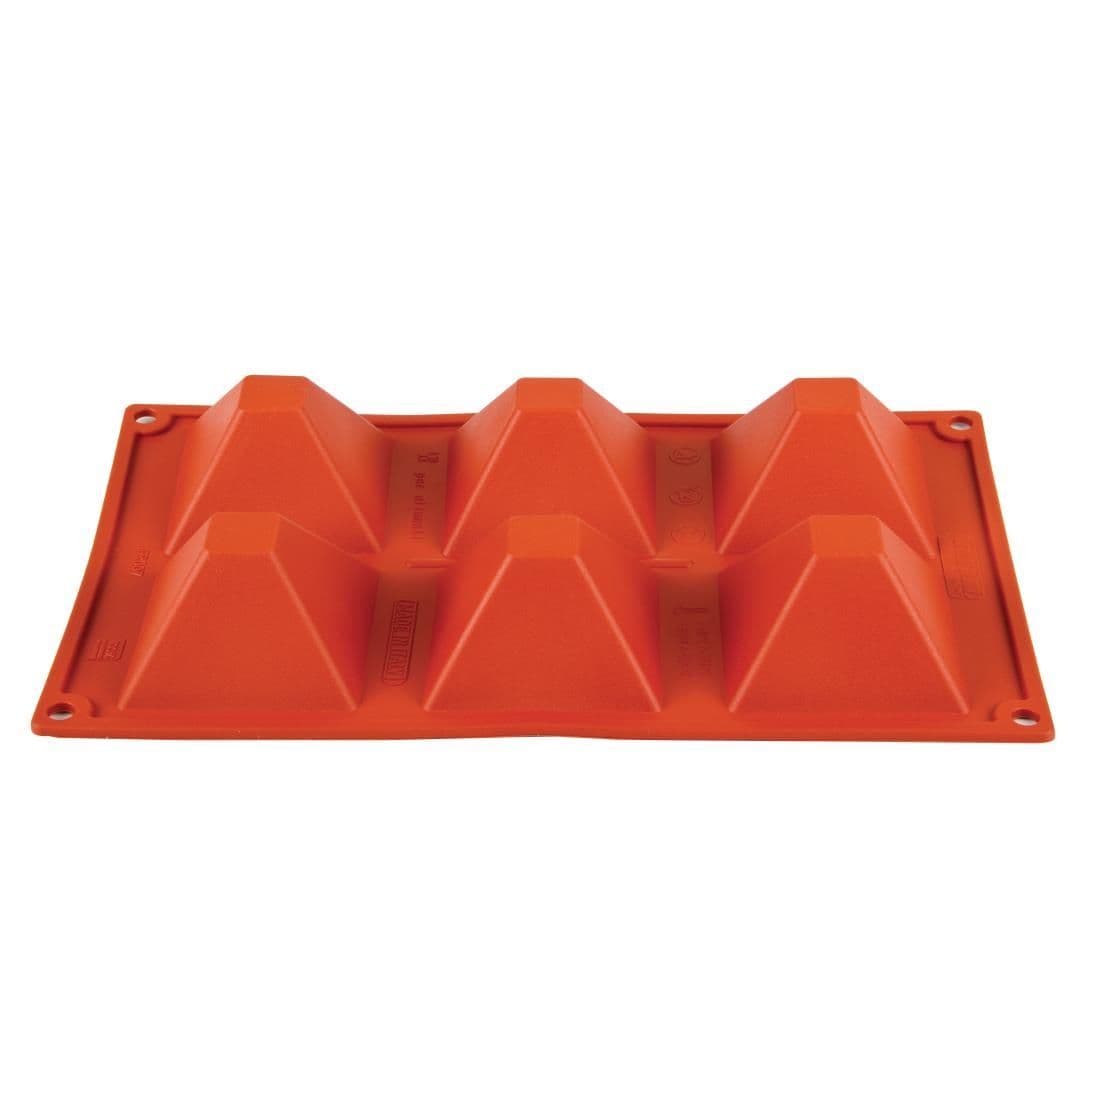 N943 Pavoni Formaflex Silicone Pyramid Mould 6 Cup